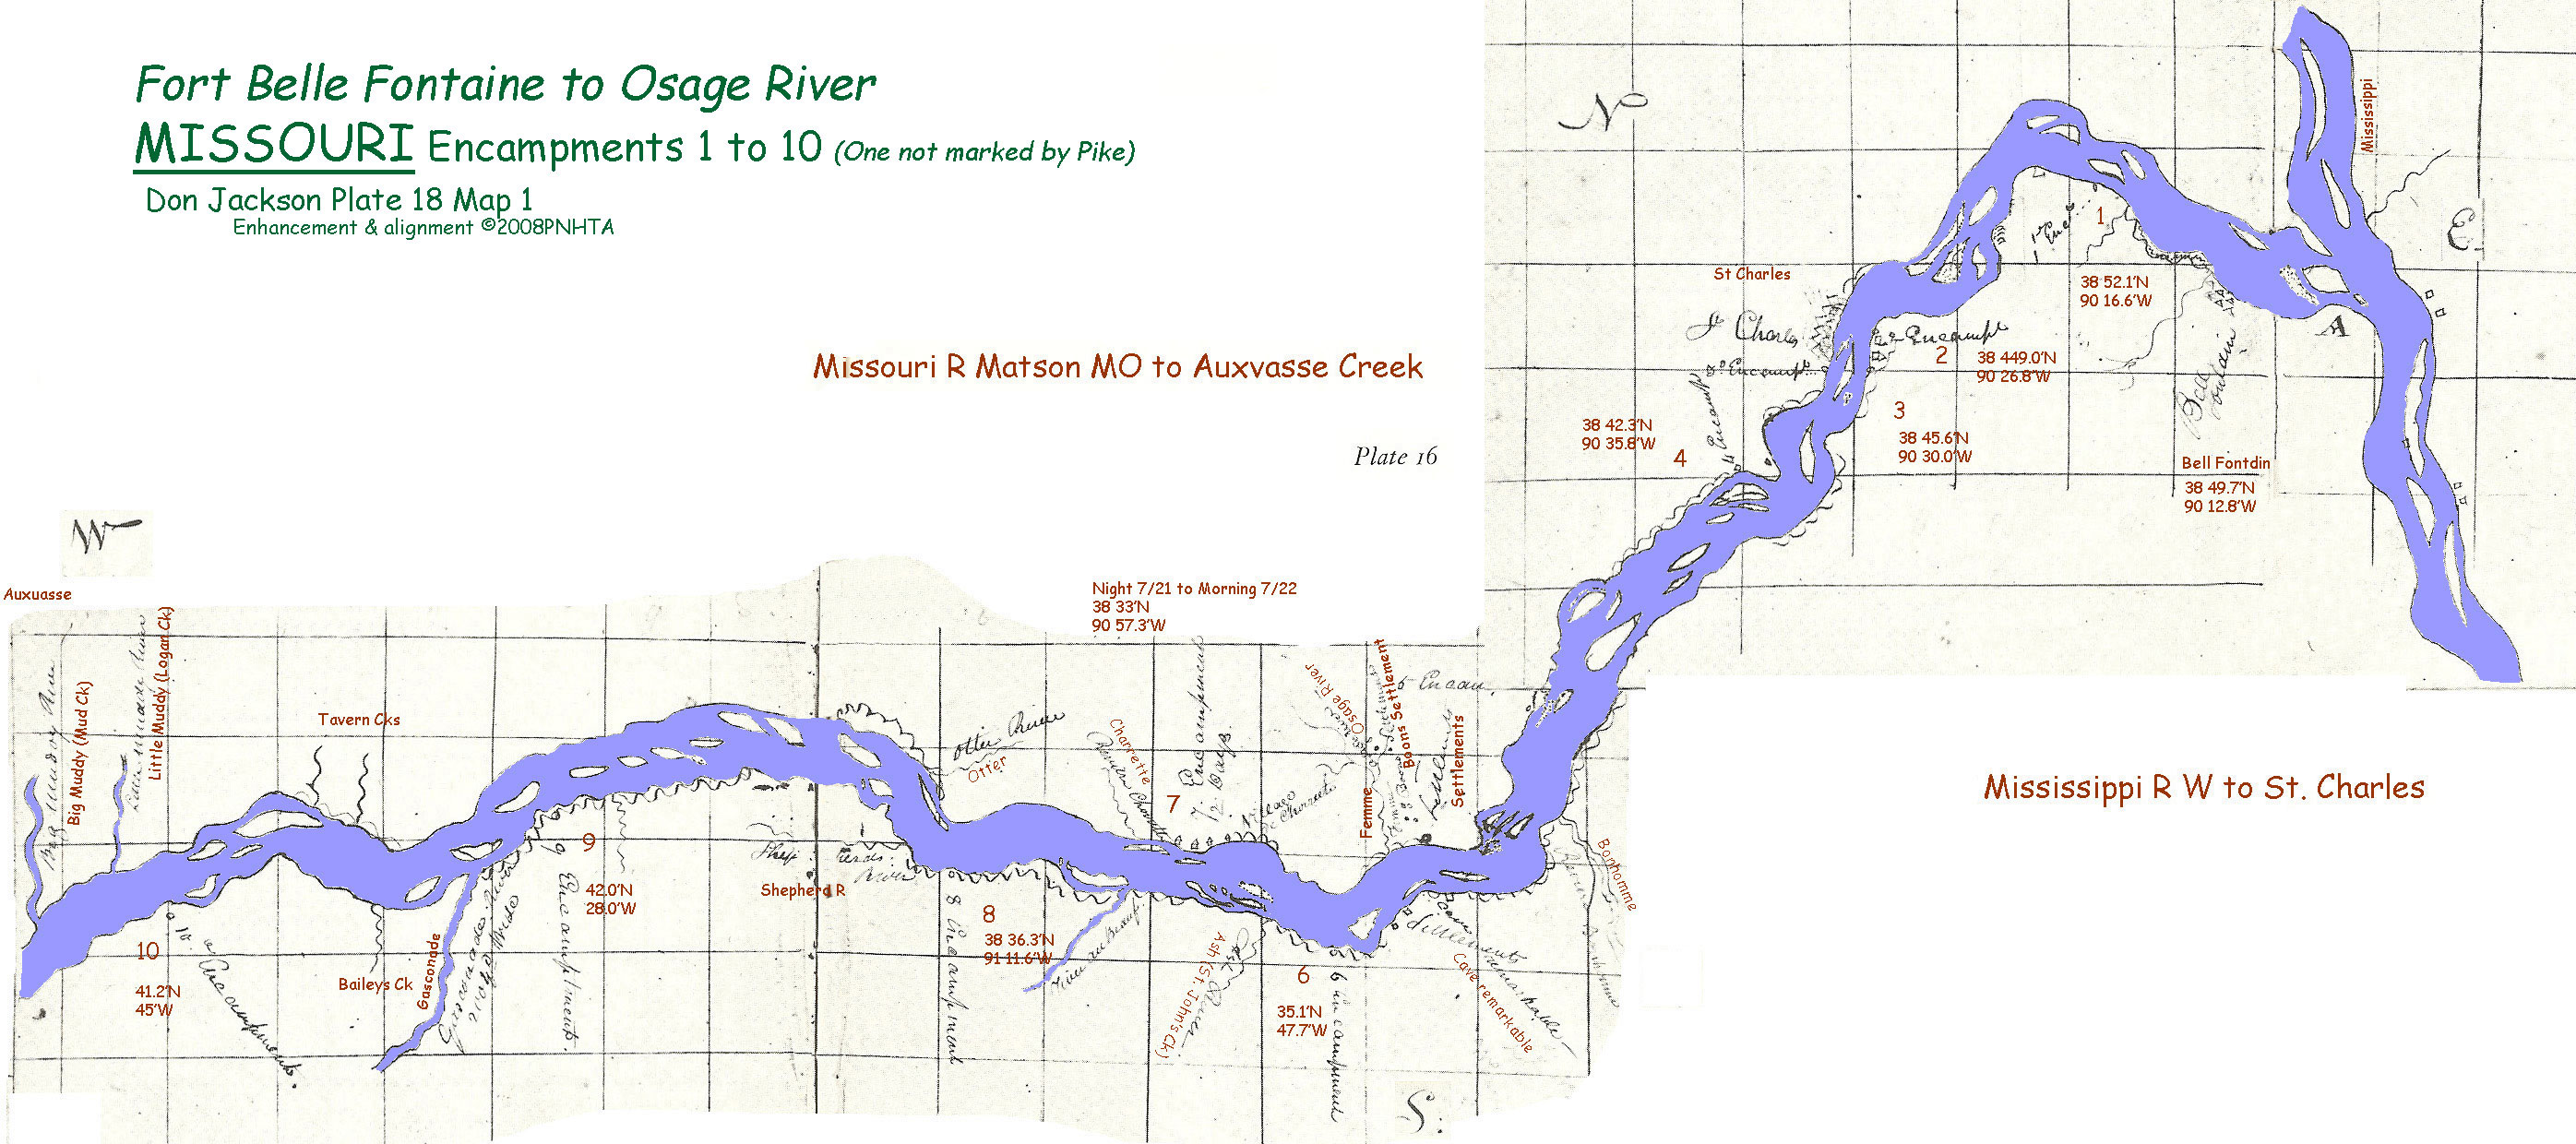 Map 1 (Field 18)- Missouri River from Fort Belle Fontaine/ St. Louis to Confluence Osage and Missouri Rivers (Jackson Plate 18)